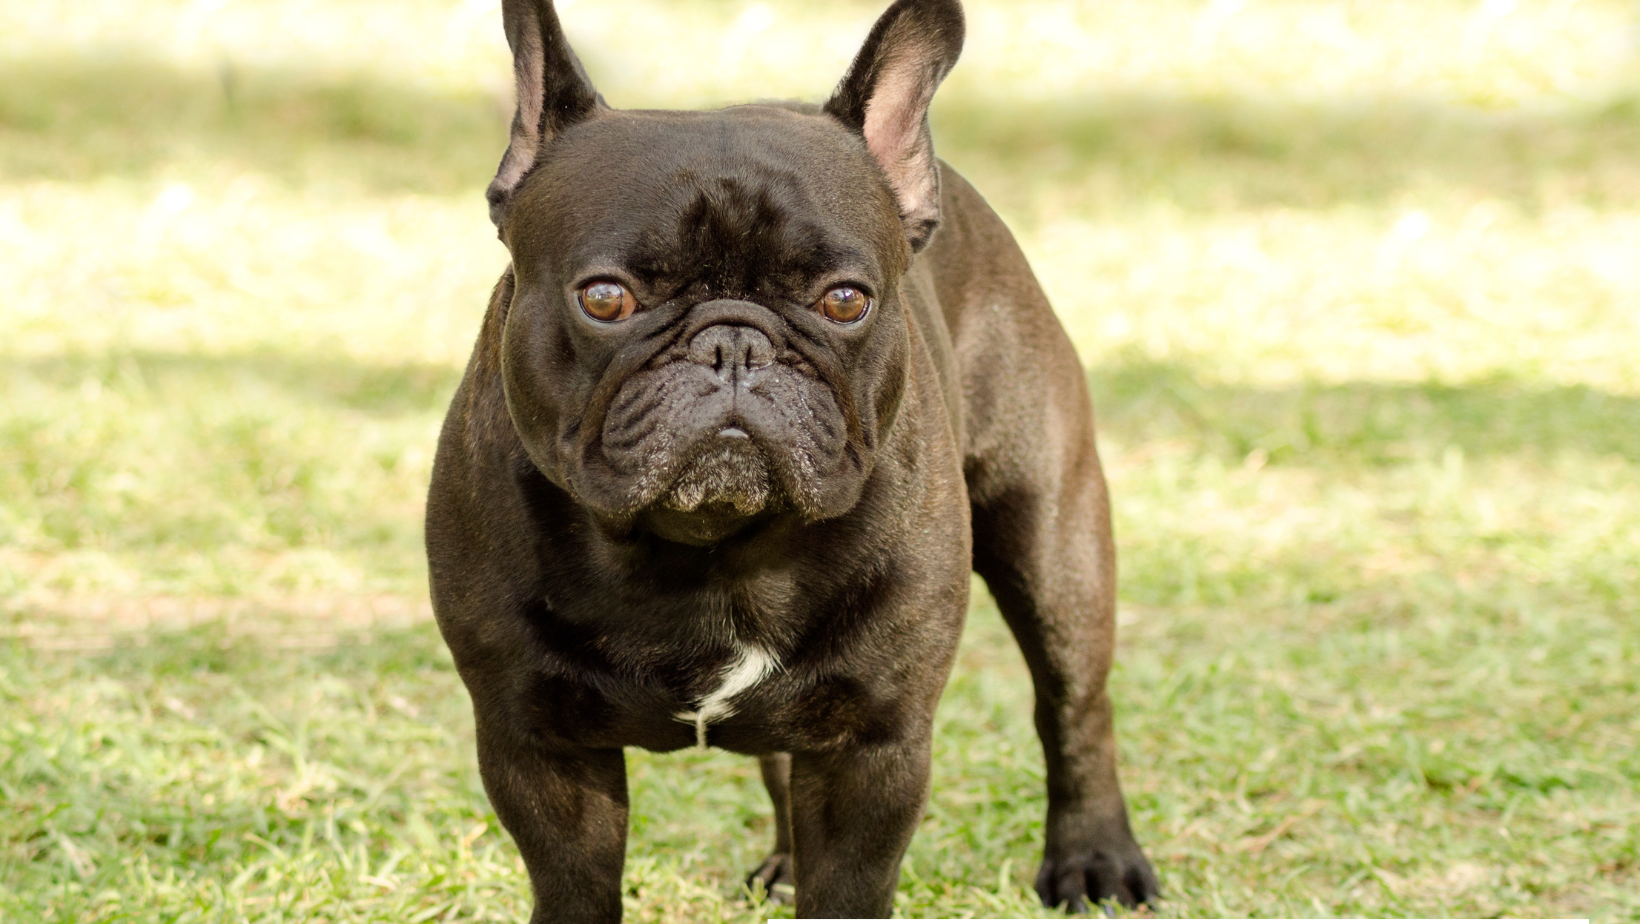 What Are The Possible Reasons That Make The French Bulldogs Cry so Much?